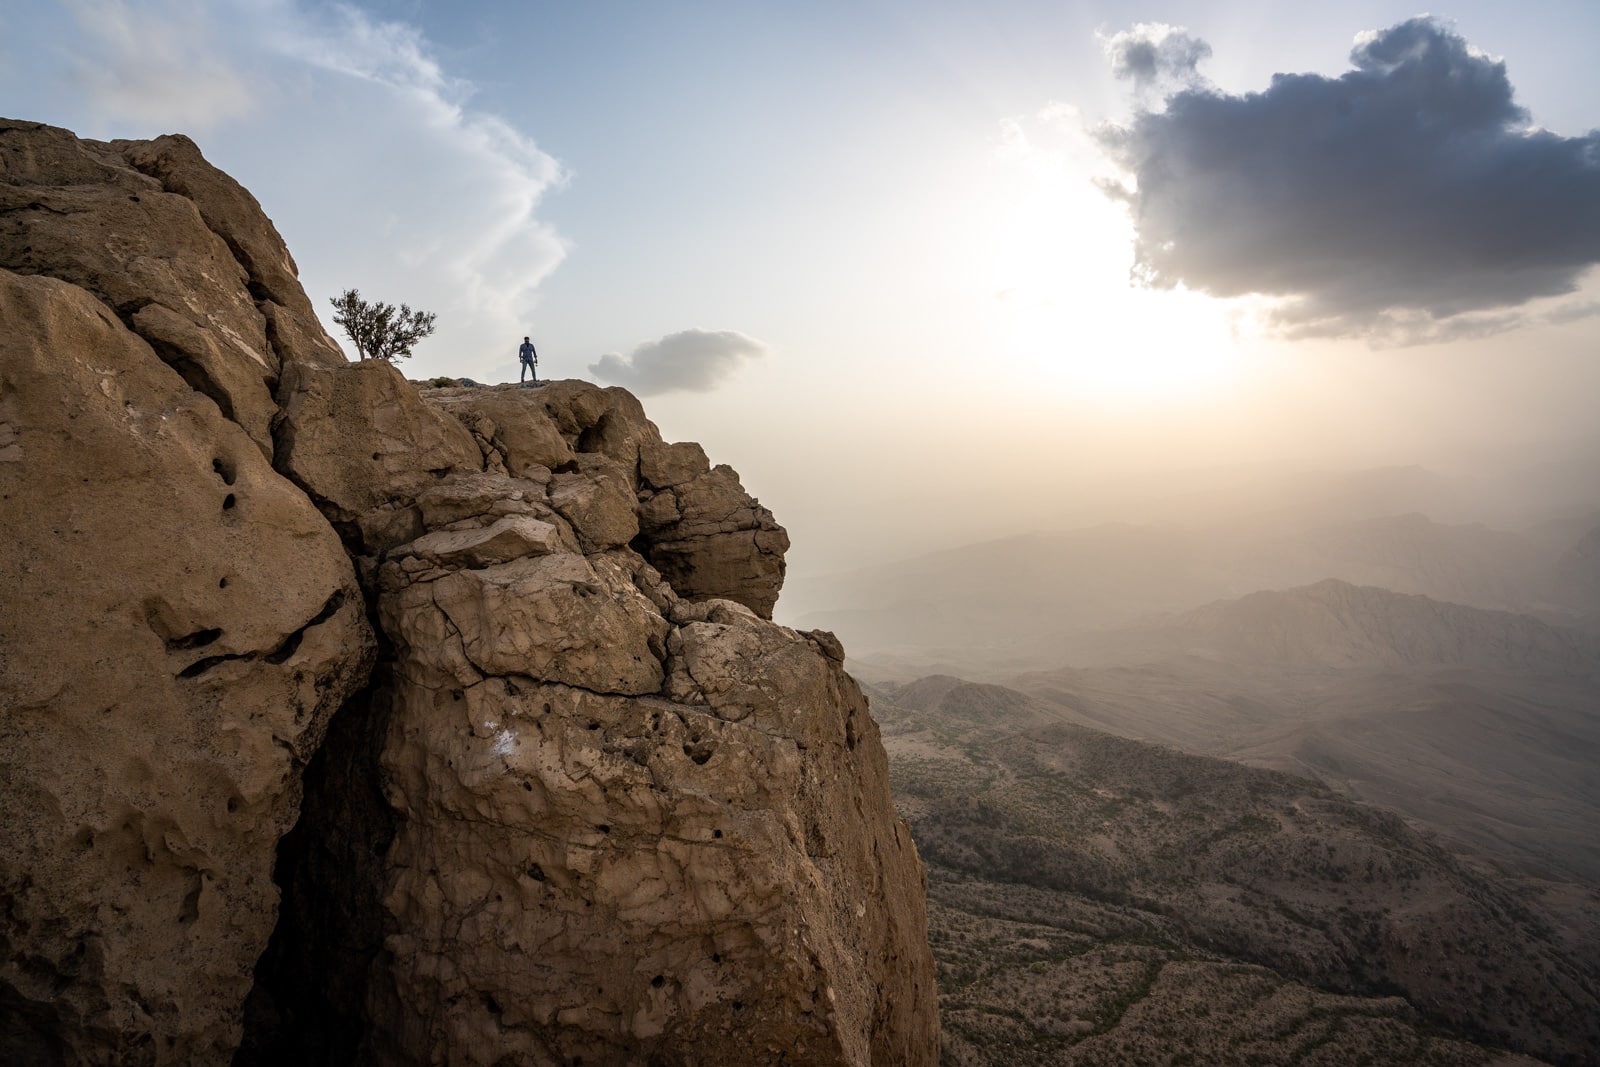 Sindh travel guide - Sunset at Gorakh Hill Station with boy standing on a cliff - Lost With Purpose travel blog